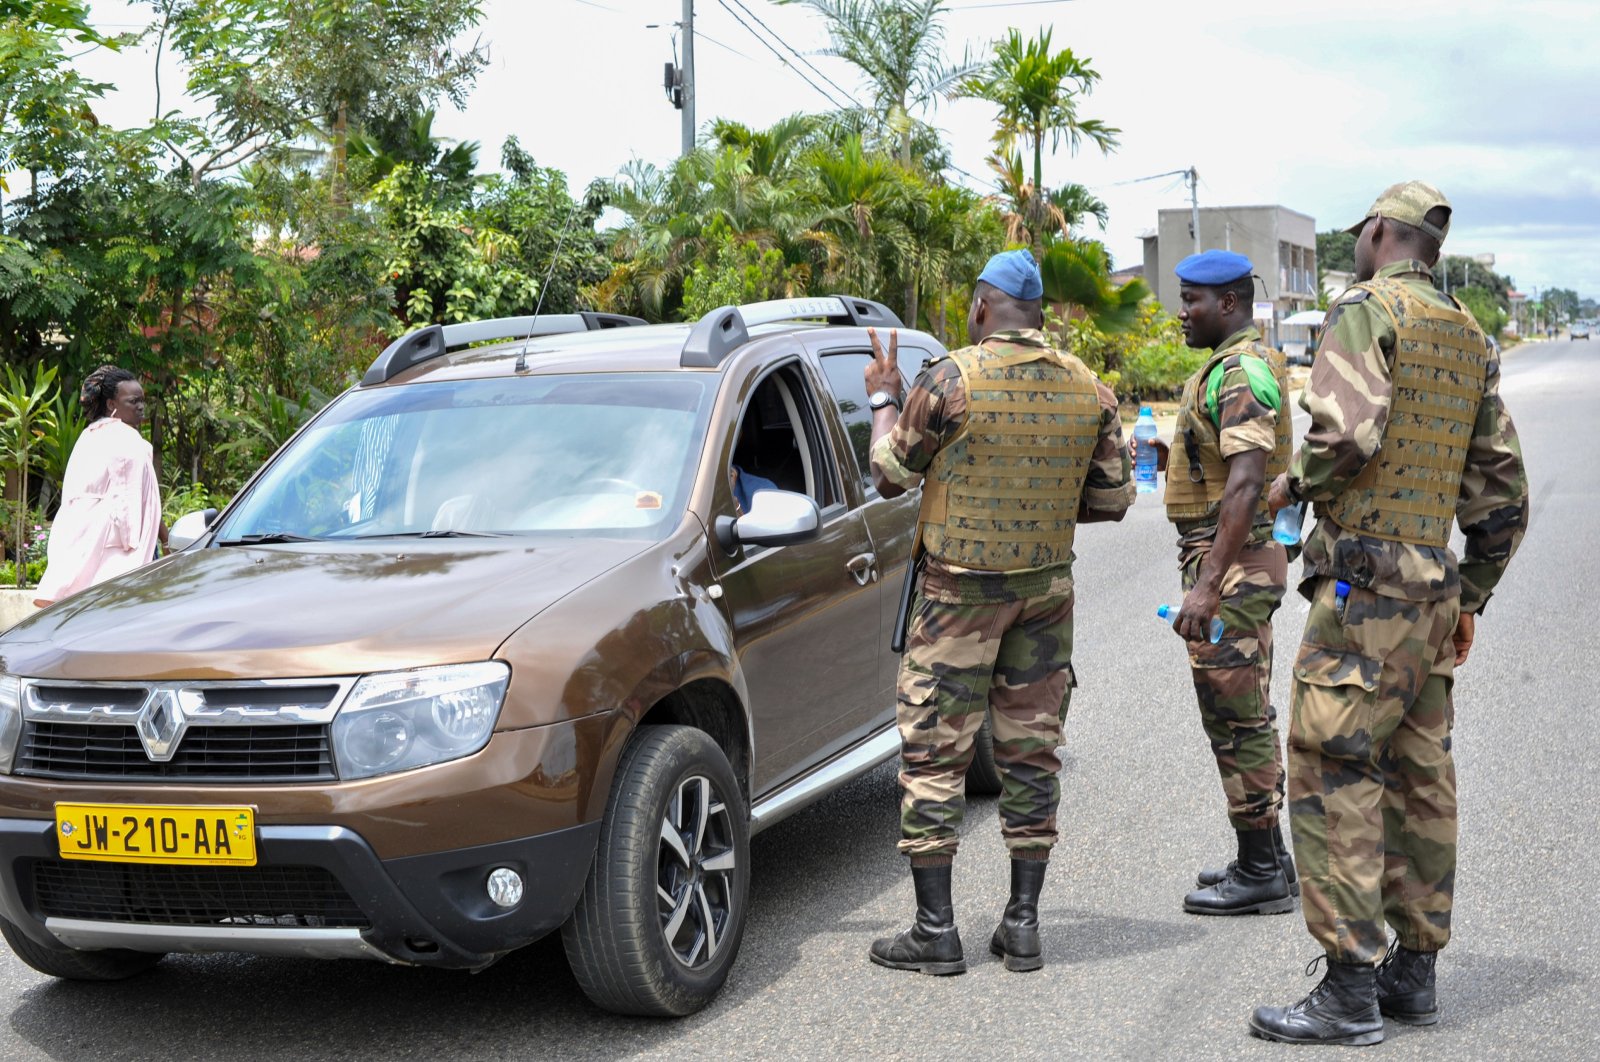 Members of the security forces gesture to a driver, at a checkpoint in the streets of Akanda, Gabon, Aug. 30, 2023. (EPA Photo)